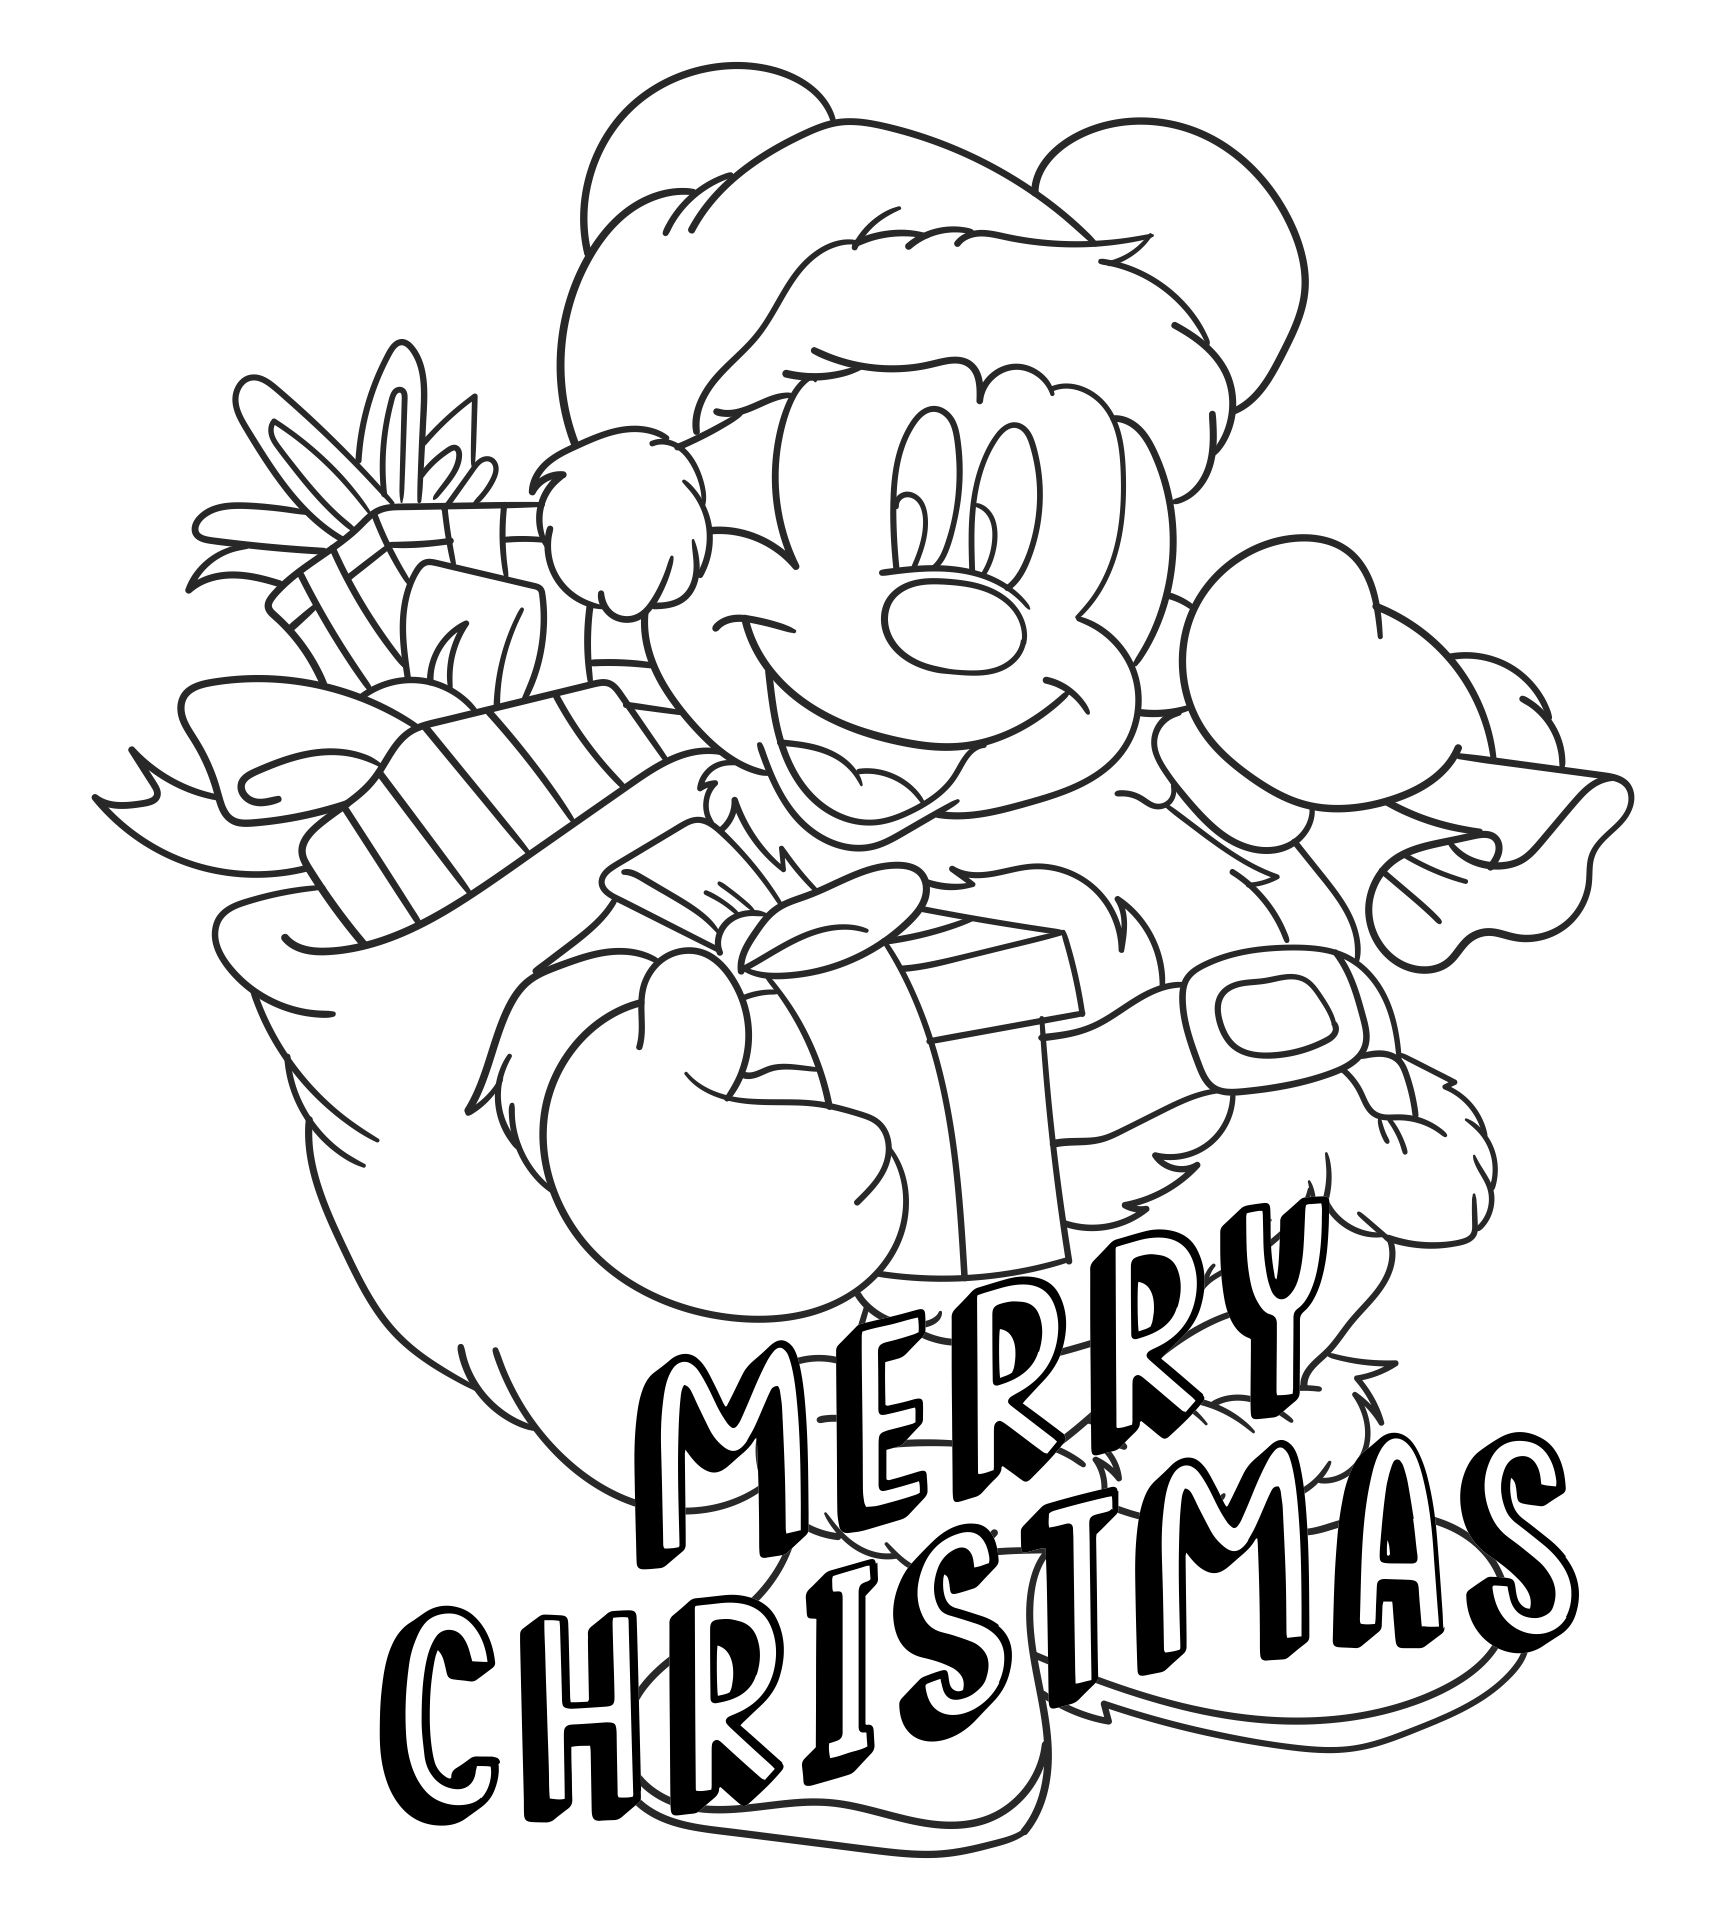 10 Best Printable Christmas Coloring Sheets Disney PDF for Free at